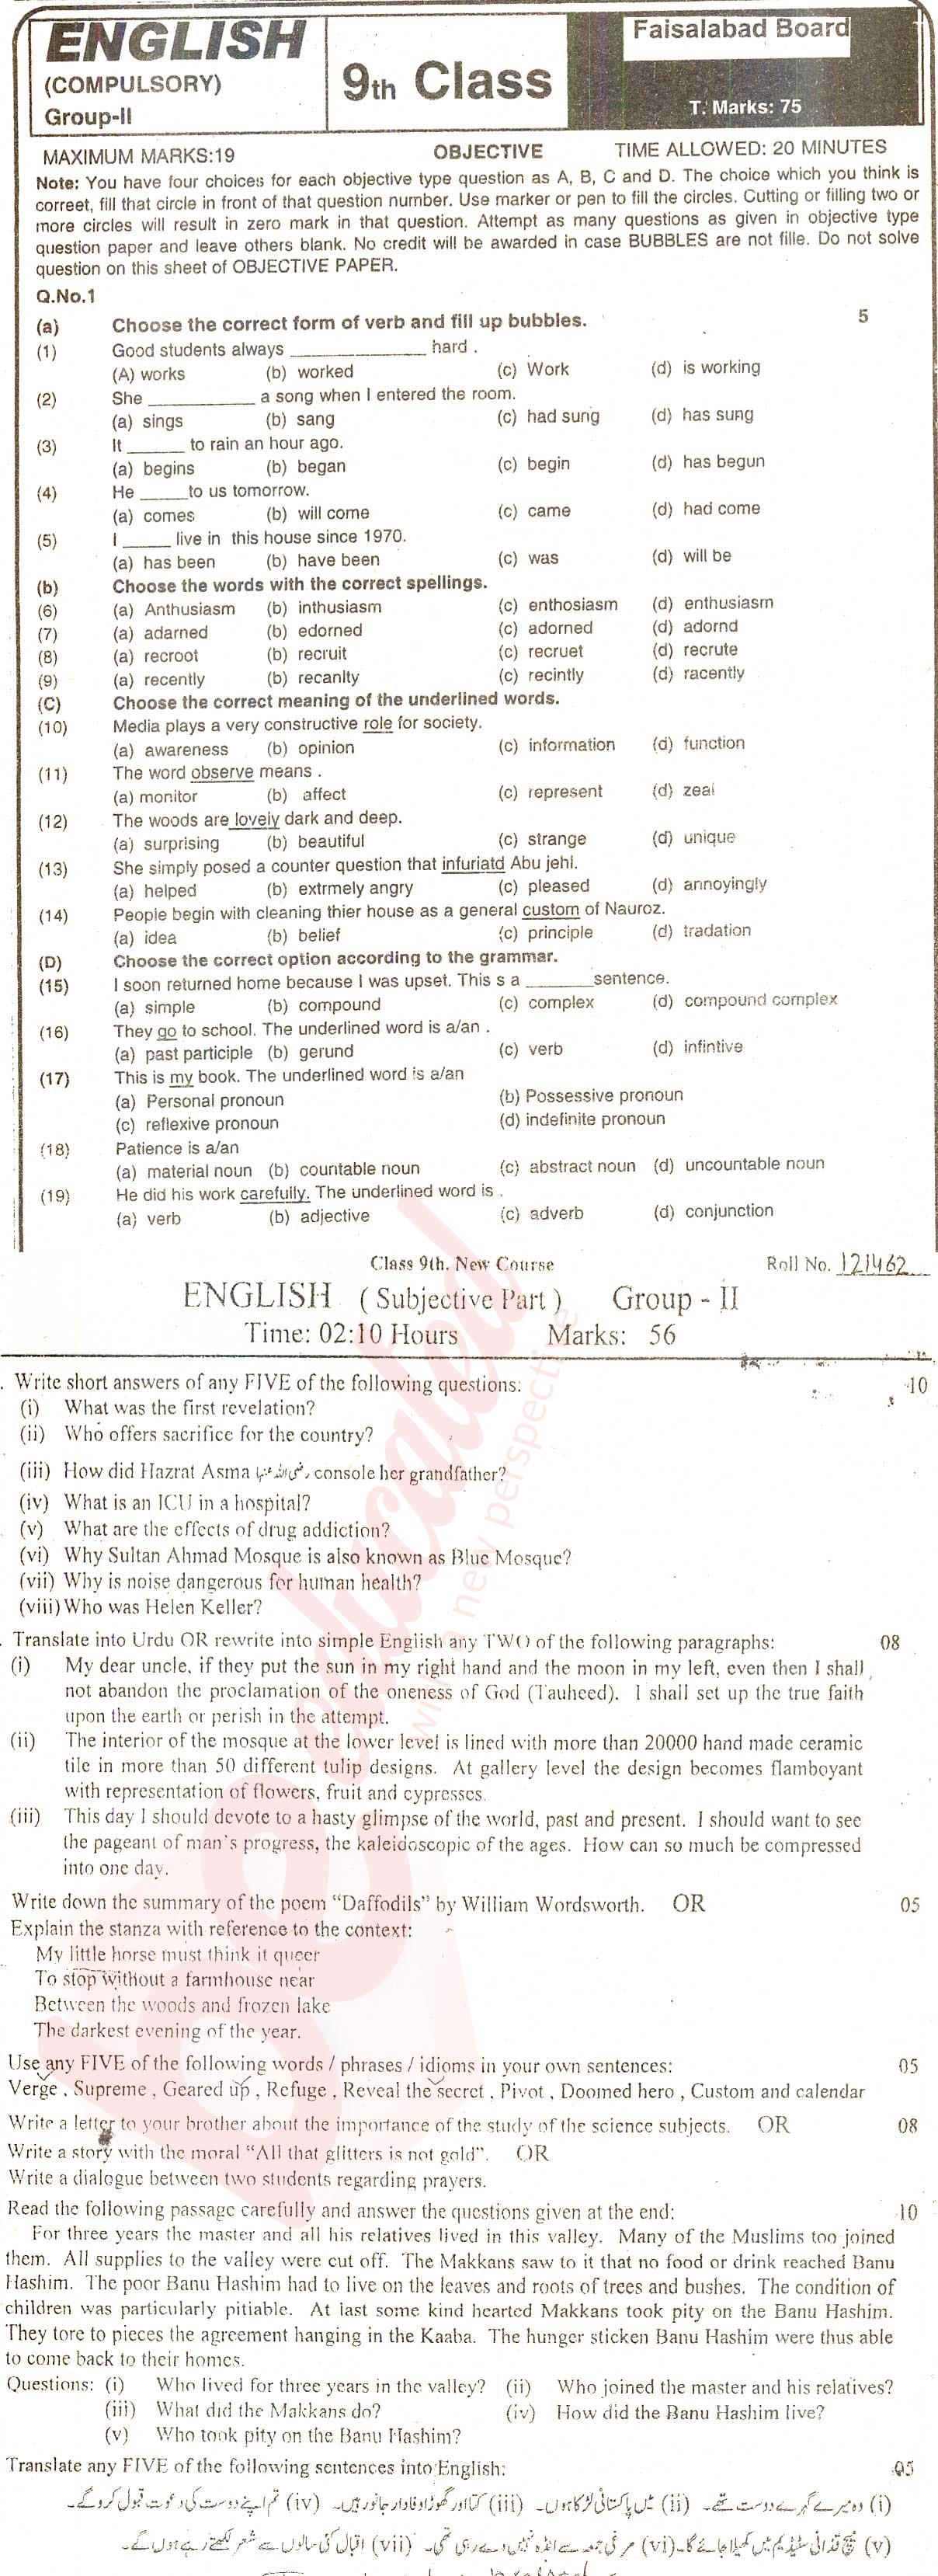 English 9th class Past Paper Group 2 BISE Faisalabad 2016